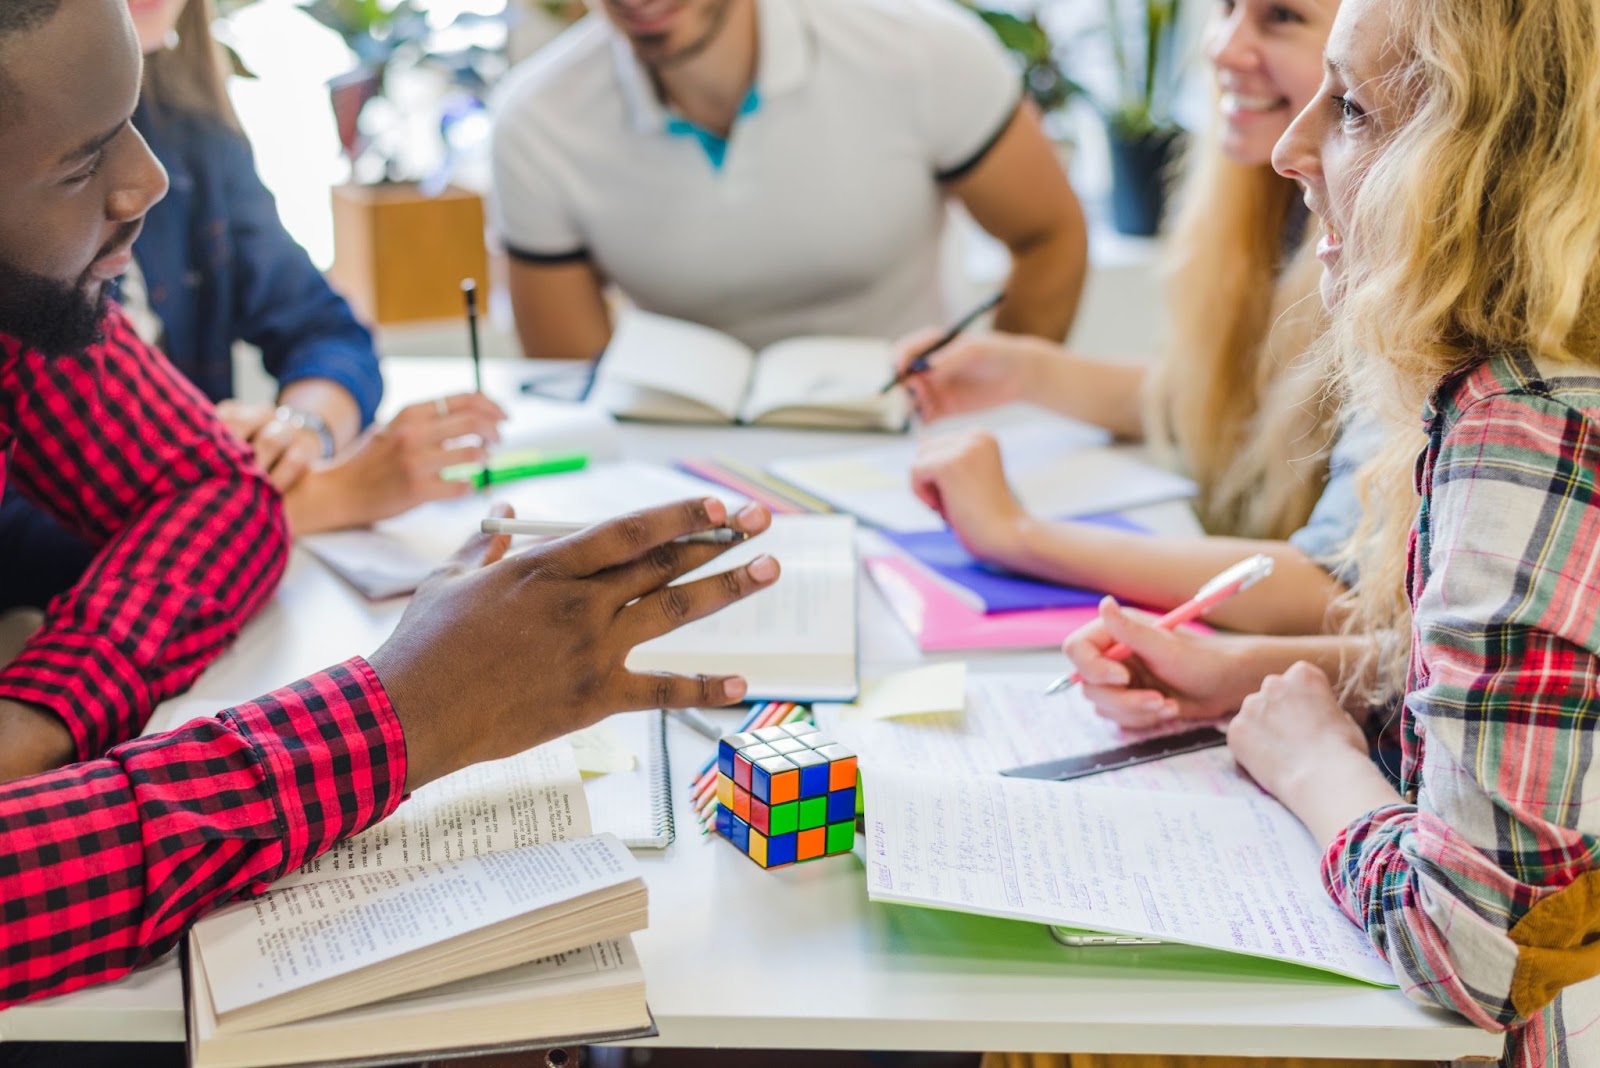 Aligning content with the Common Core Standards fosters collaboration among educators.